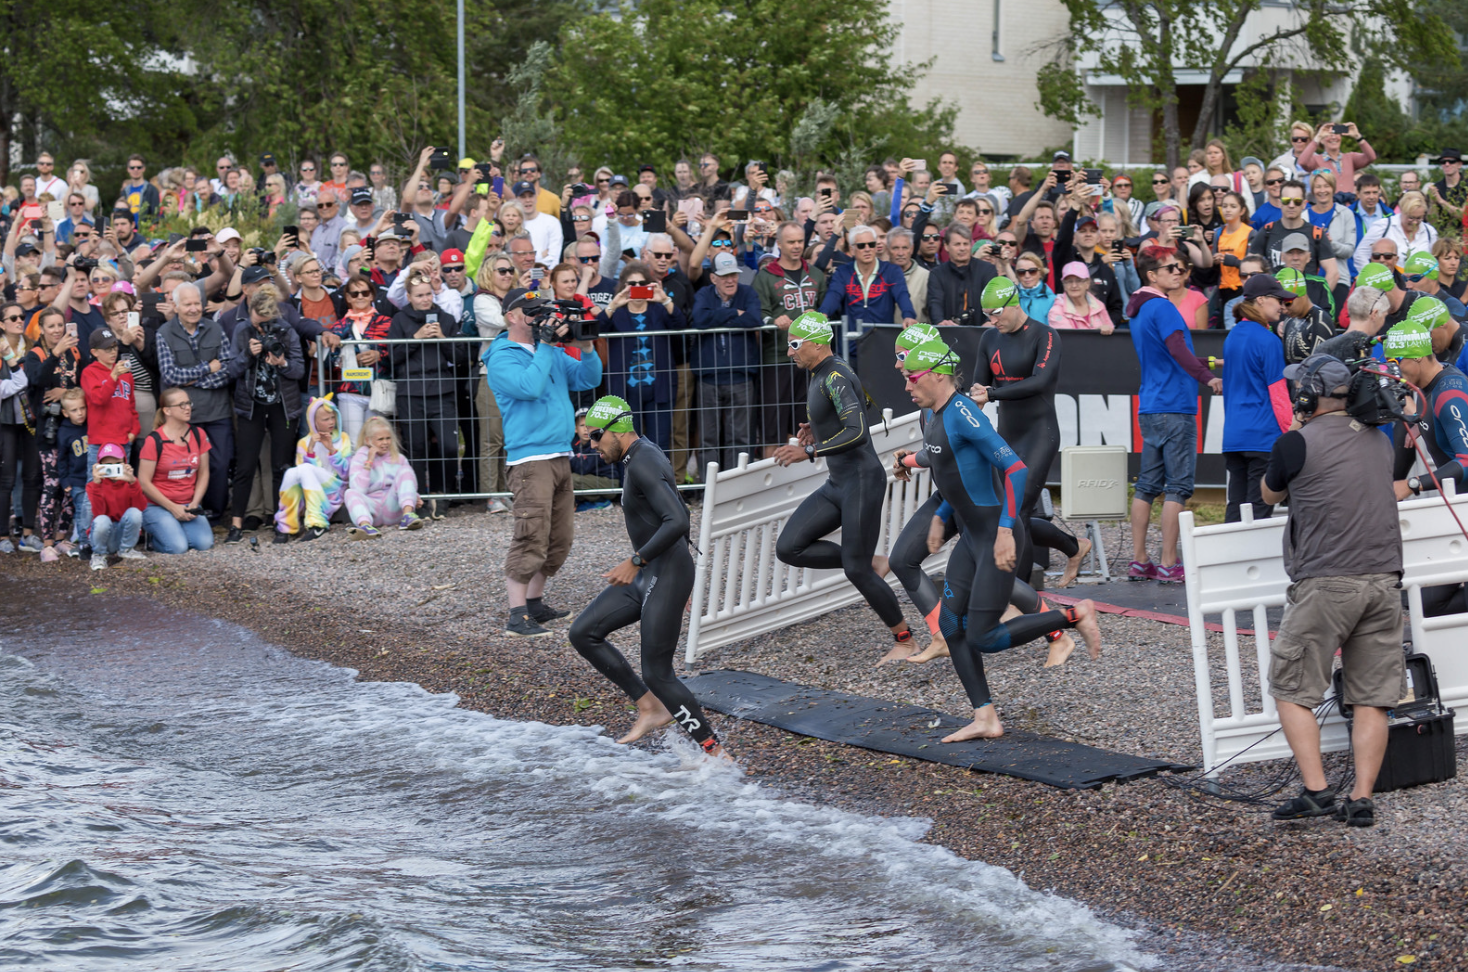 In the world's happiest country, Finland, triathletes run into Lake Vesijärvi for their Ironman Swimming Competition, June 29, 2019 (Photo by Marco Verch) Creative Commons license via Flickr